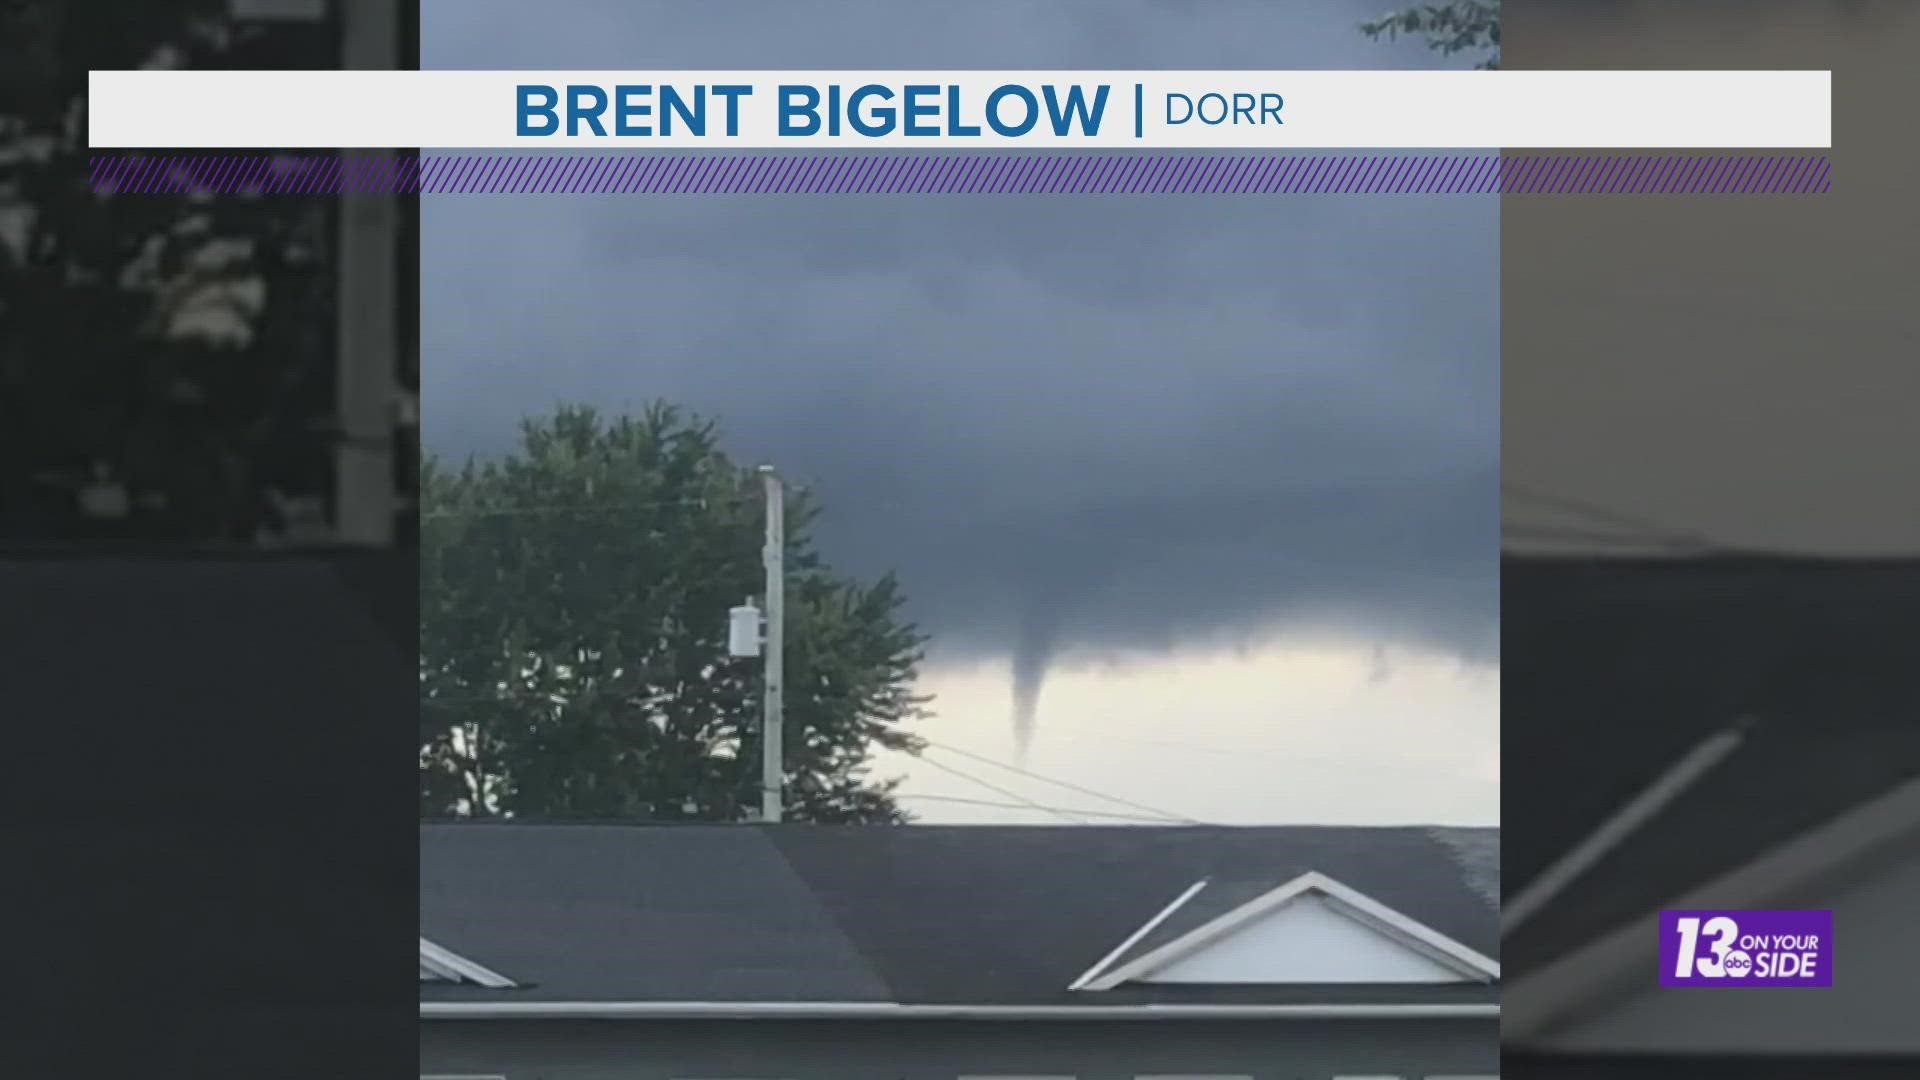 Chief Meteorologist George Lessens discusses the funnel cloud that was reported near Dorr Friday afternoon.